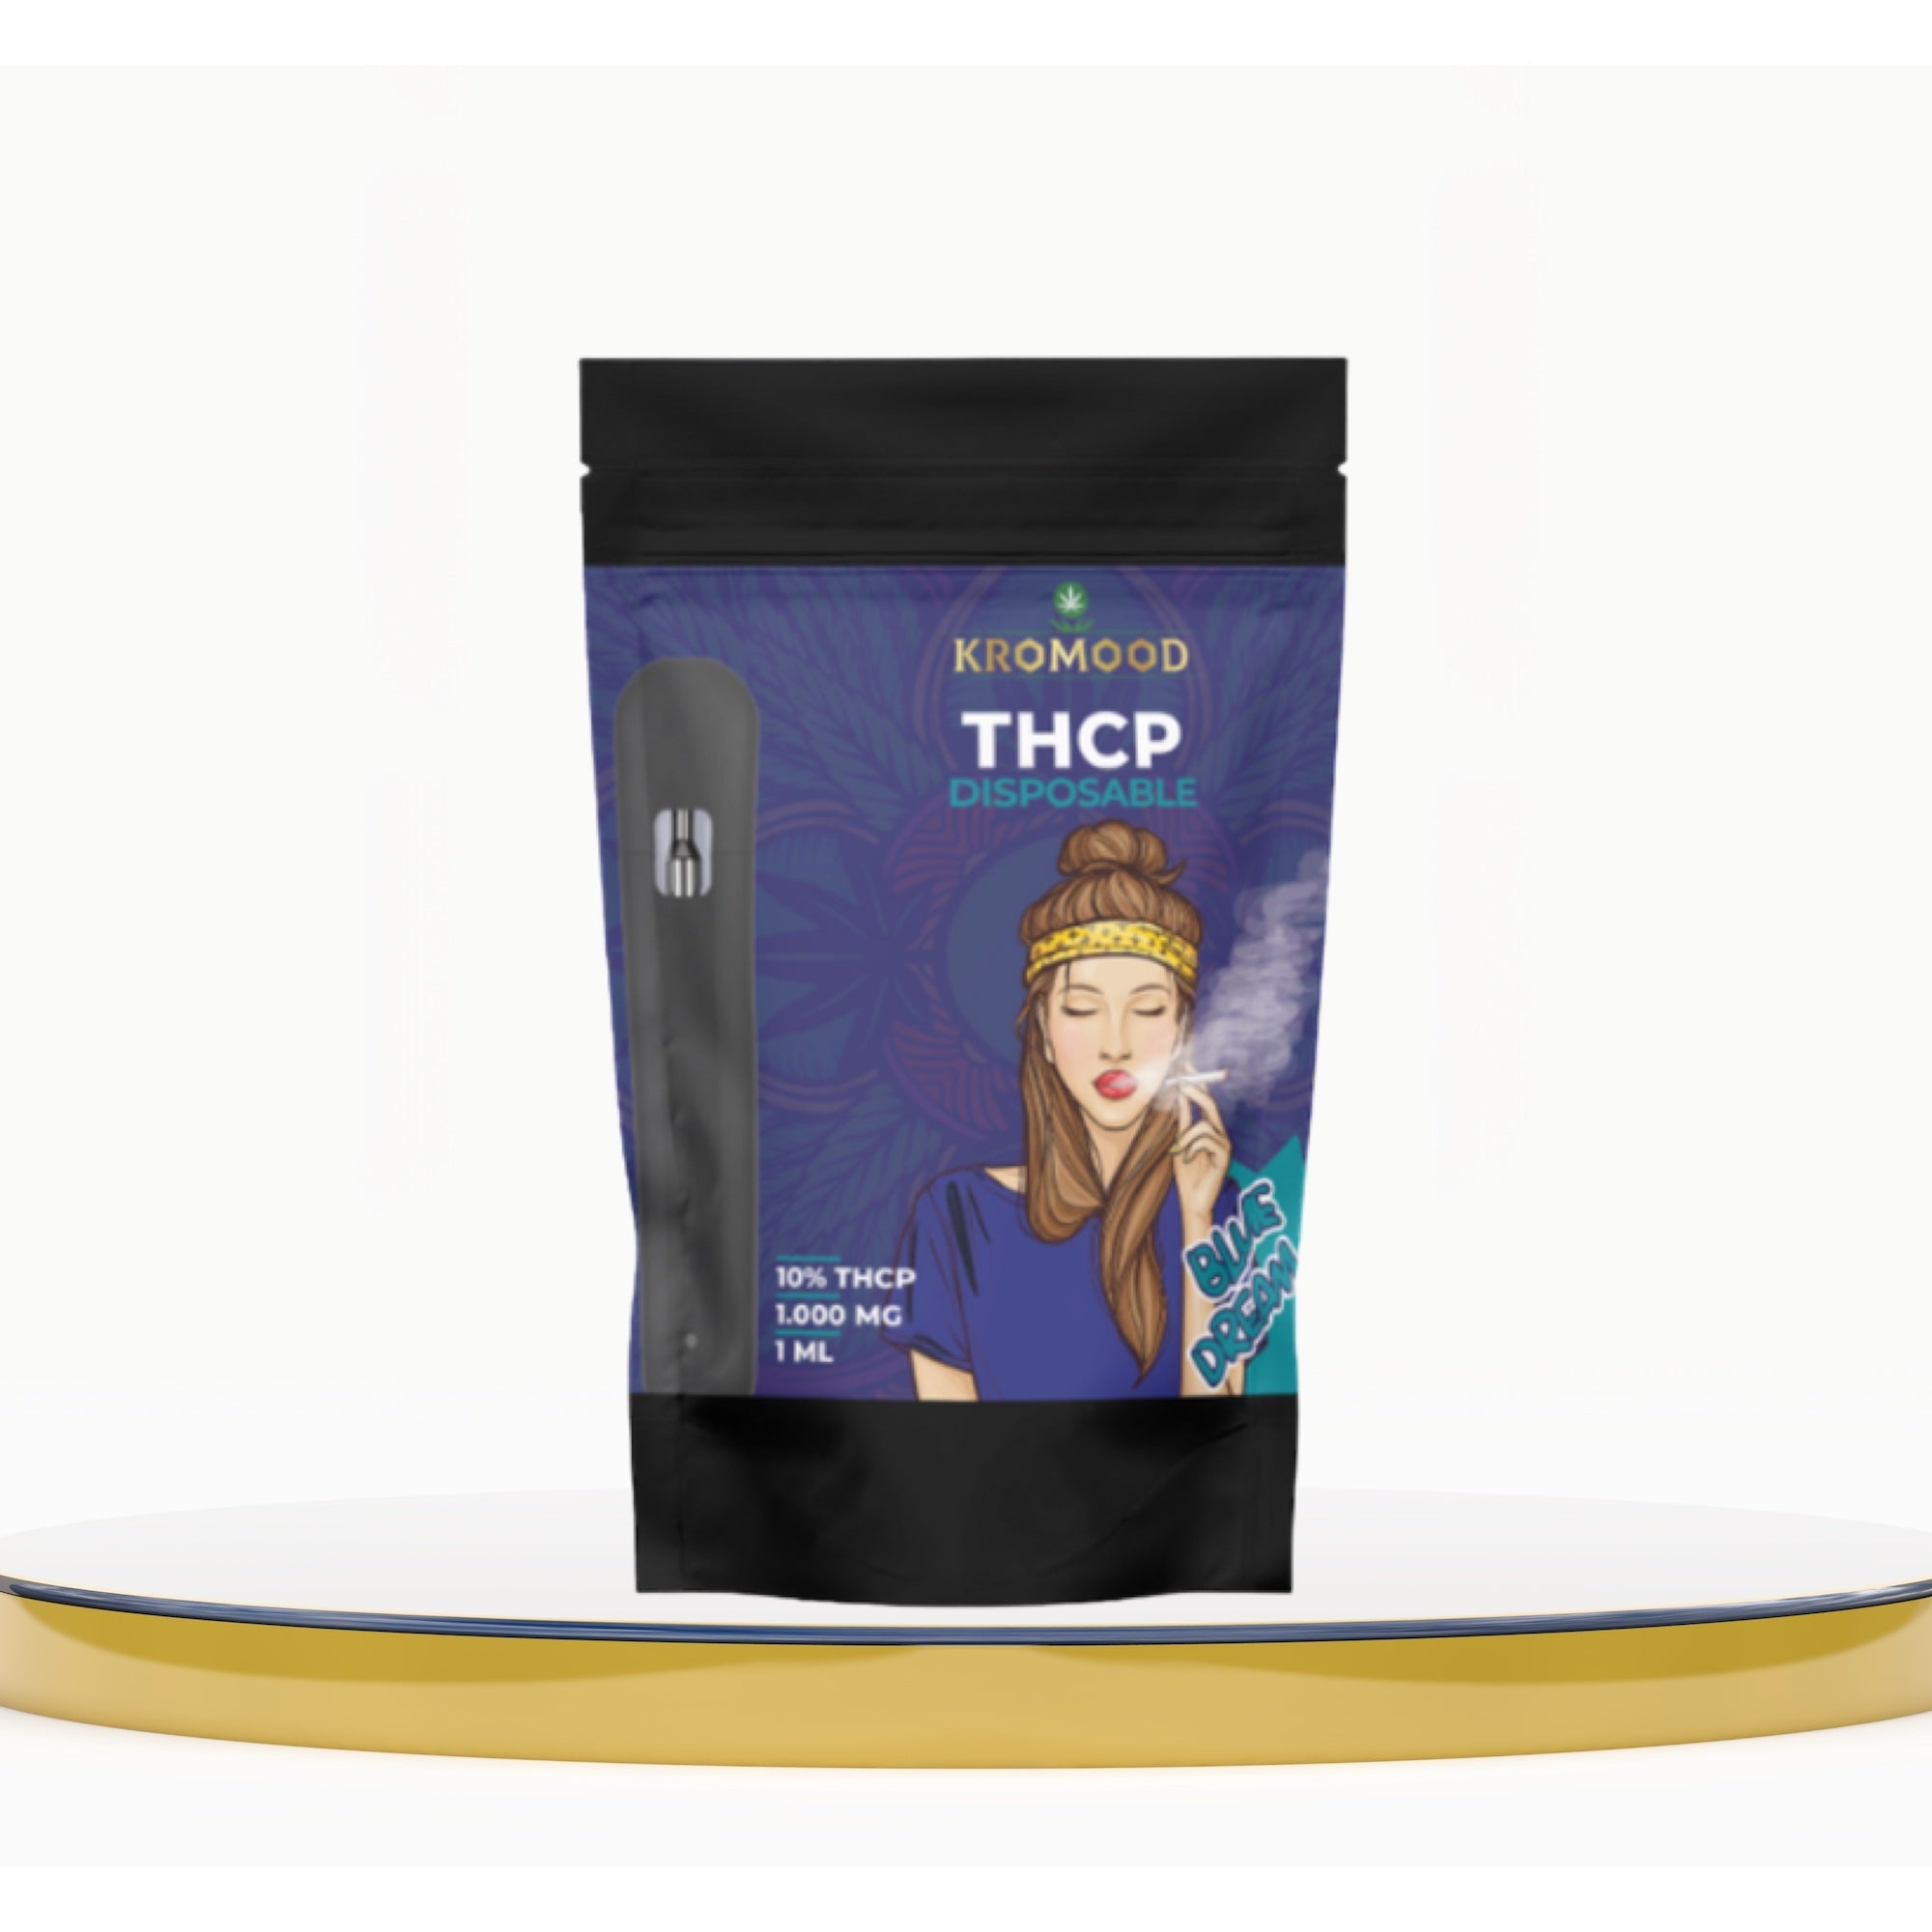 KroMood THCP Disposable Puff - Blue Dream: The Peak of Vaping, 10% THCP/1ML, 600 Puffs, CCELL Puff Technology 